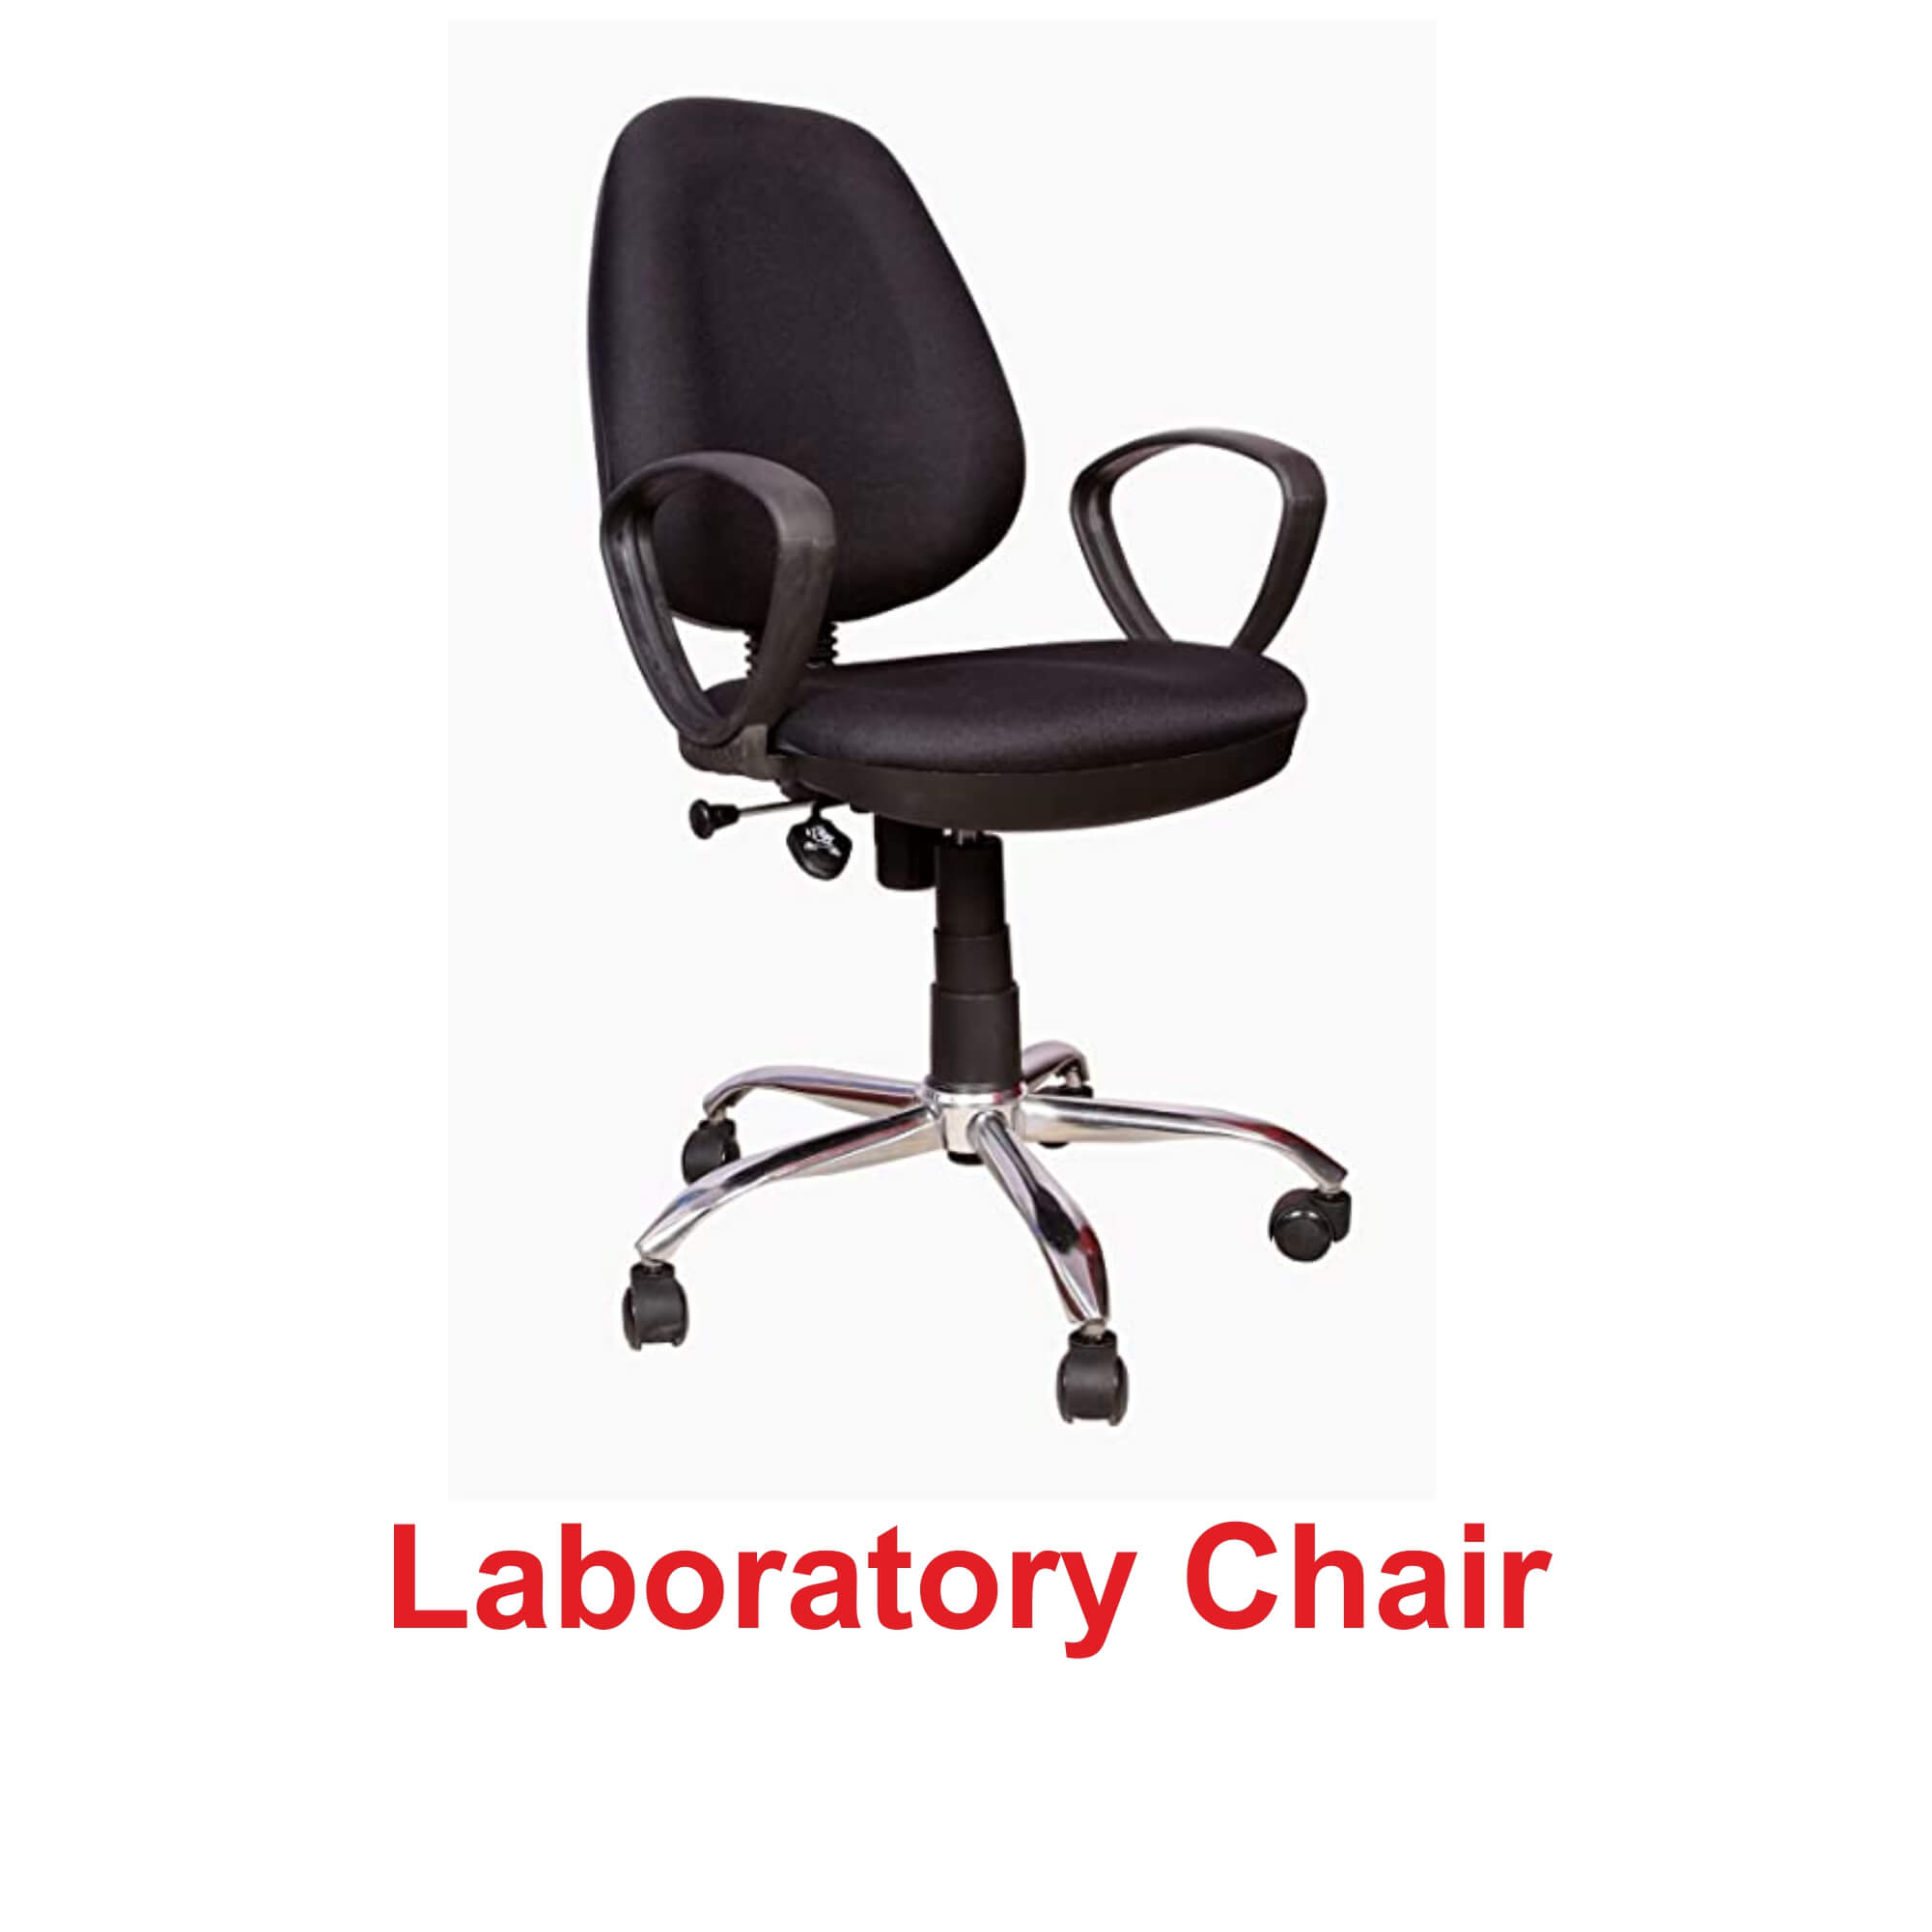 Laboratory Chair Manufacturer in India